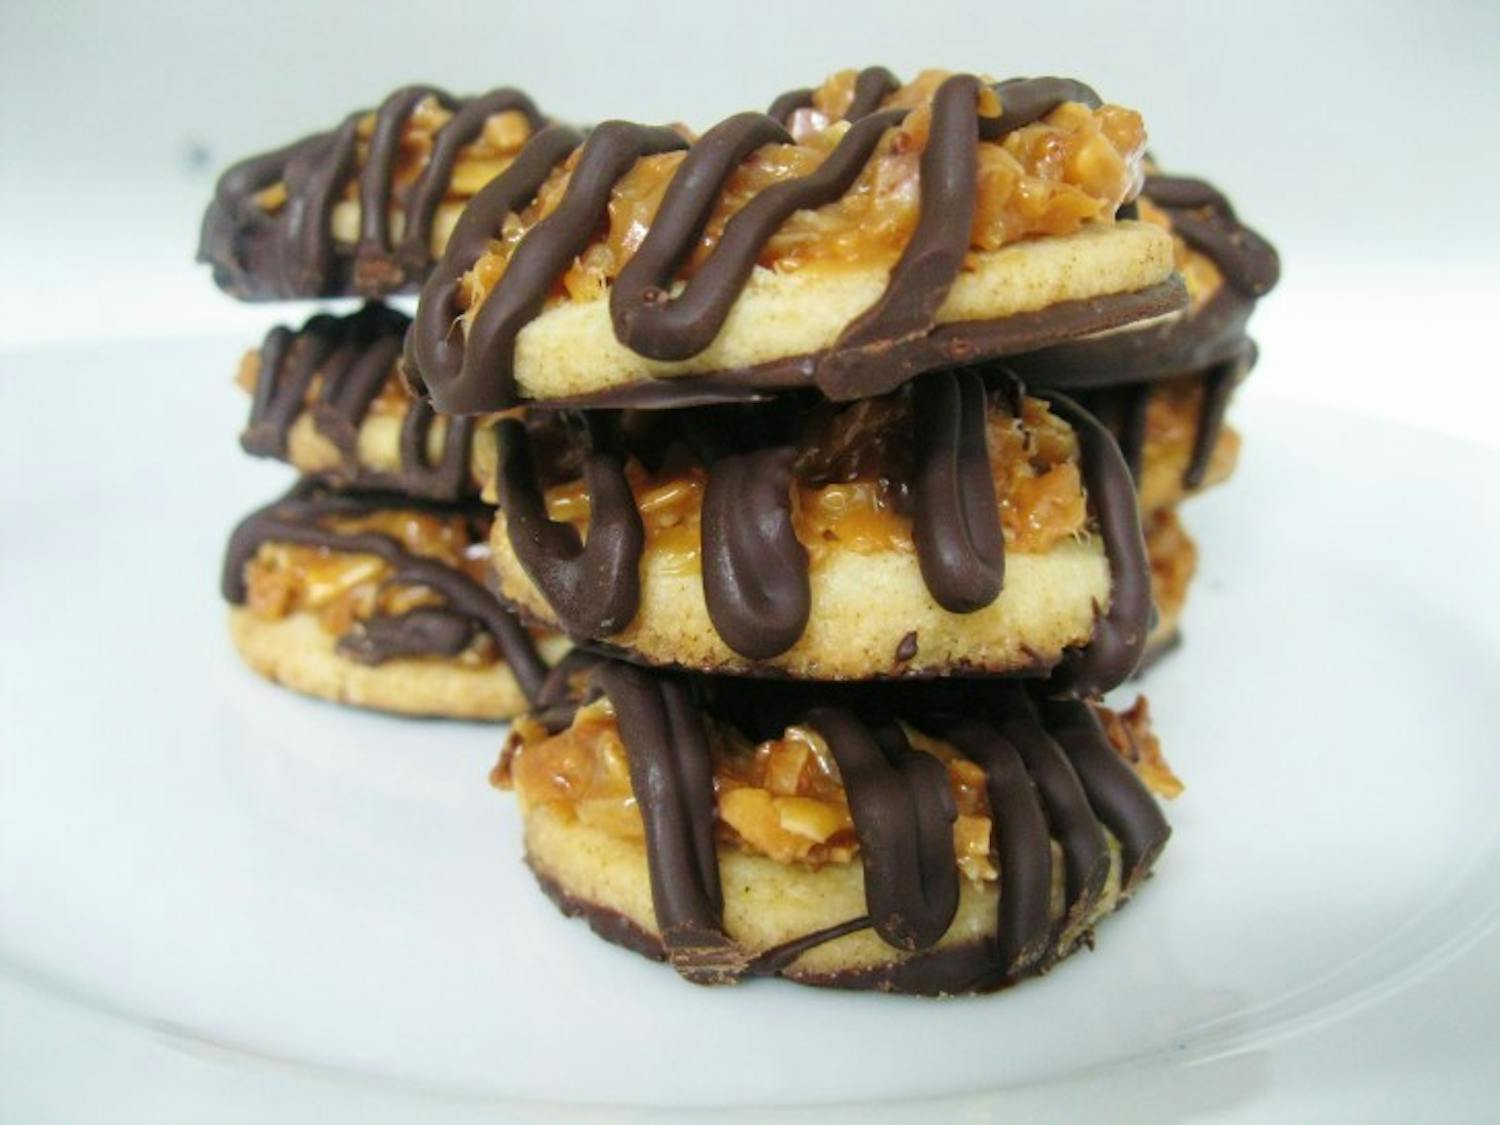 Samoas are simple shortbread cookies with a hole in the center, covered in a caramel and toasted coconut topping and then dipped in and streaked with rich dark chocolate.